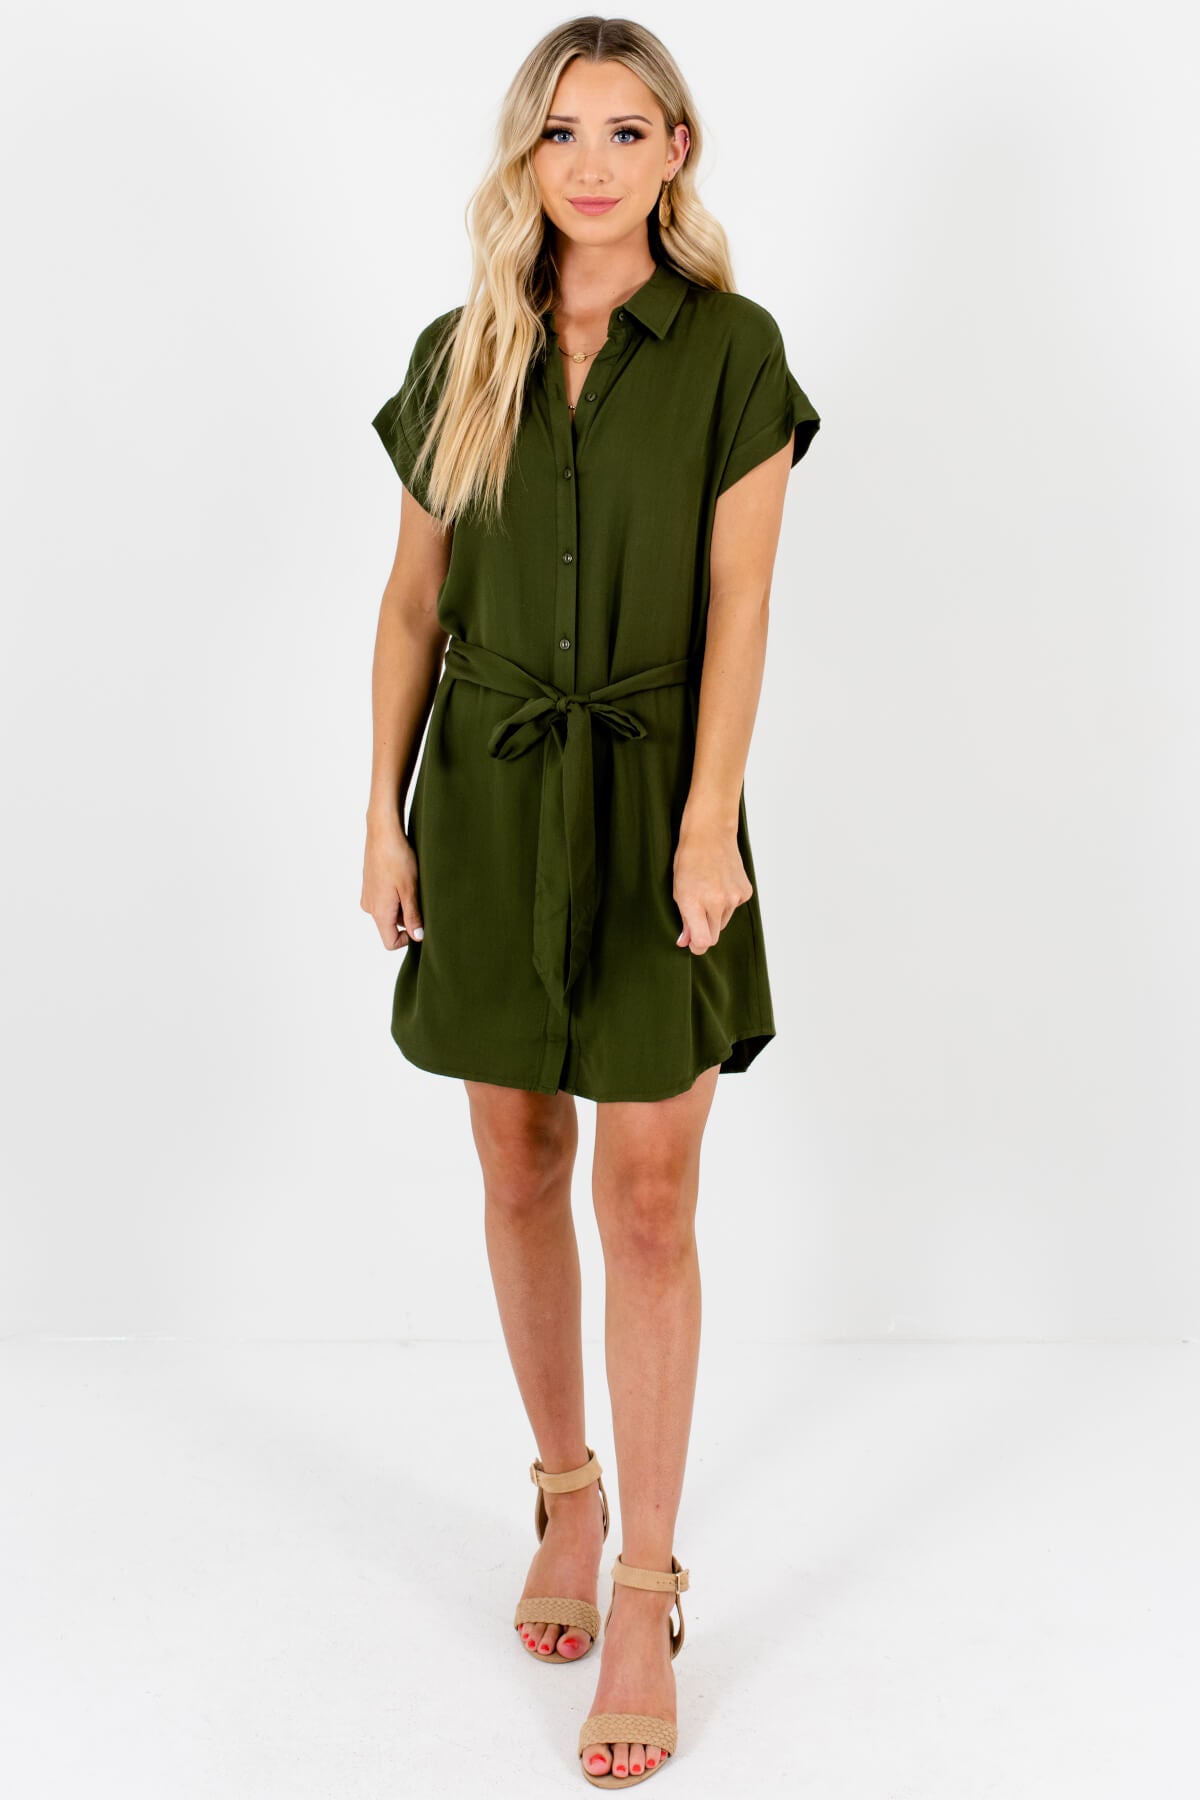 Olive Green Shirt Collar Button Up Mini Dresses for Women